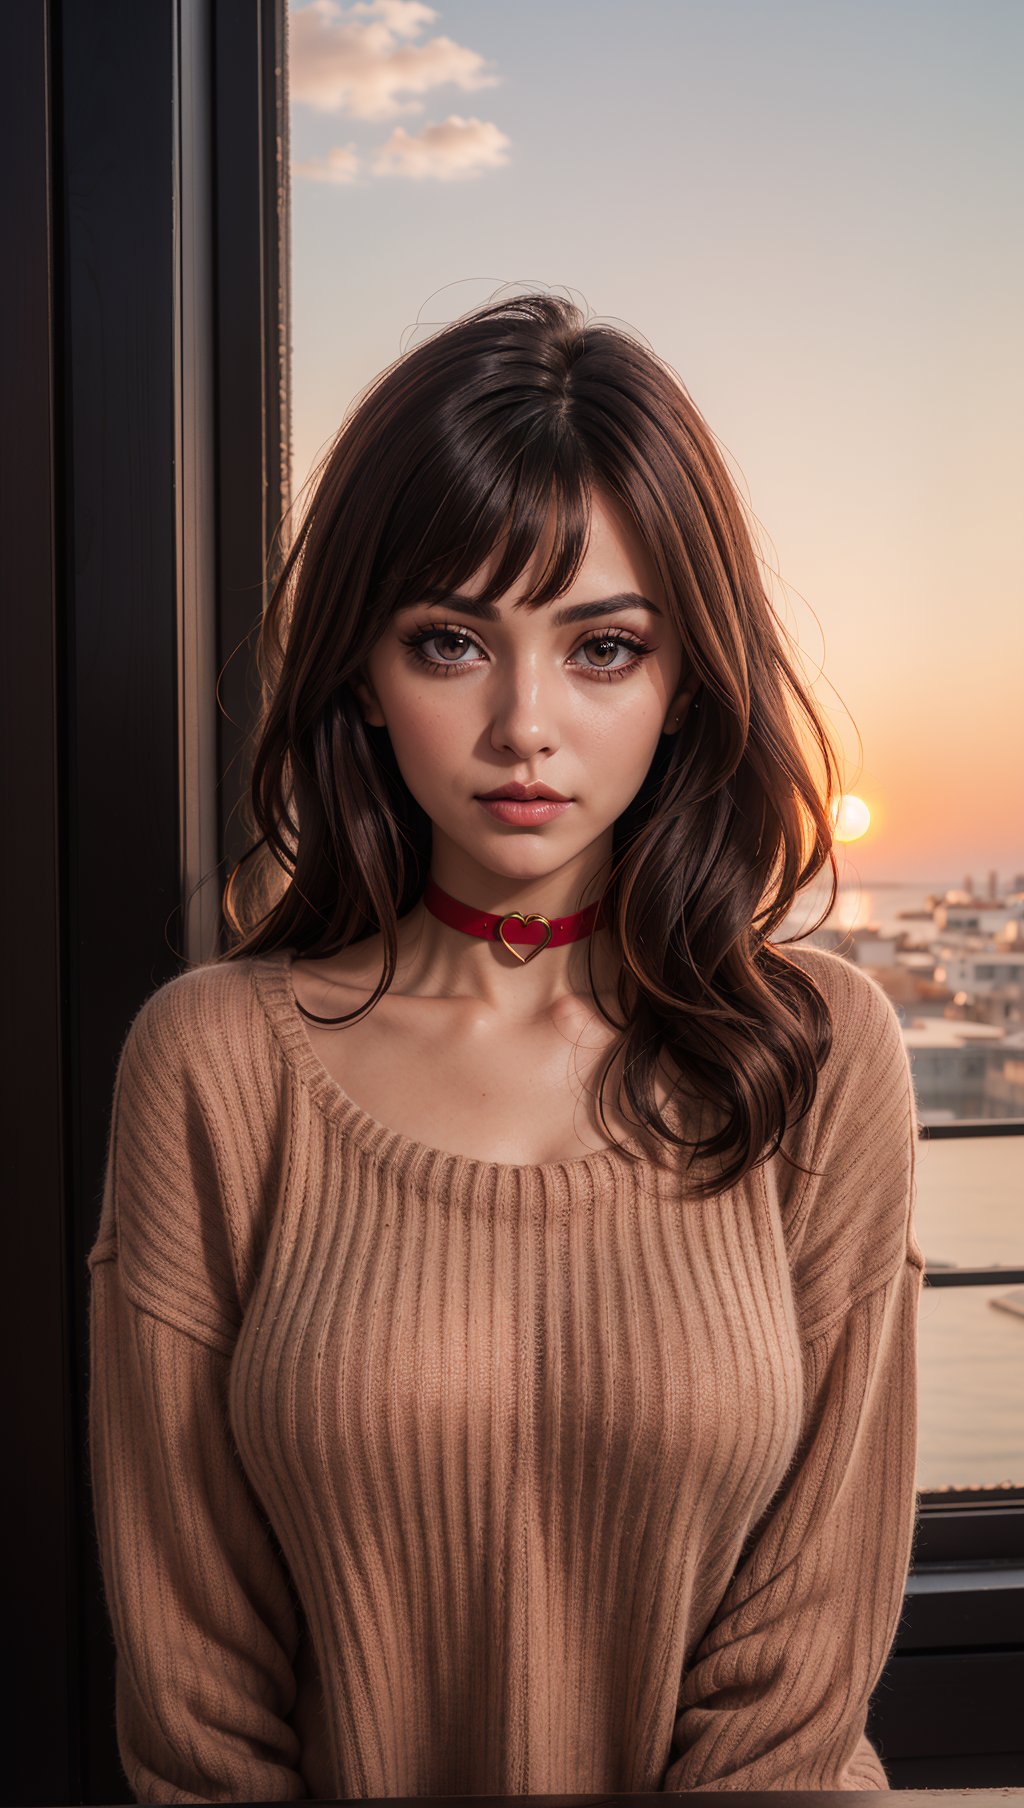 1 young cute iranian girl,very slim,skinny,redhead,rouge,red neck lace choker,cateyes makeup,colorful,oversize knit jumper,softcore,warm lighting,cosy atmosphere,Instagram style,red theme,upper body shot,(cinematic, black and red:0.85),(sunset beautiful background:1.3),sharp,dim colors,